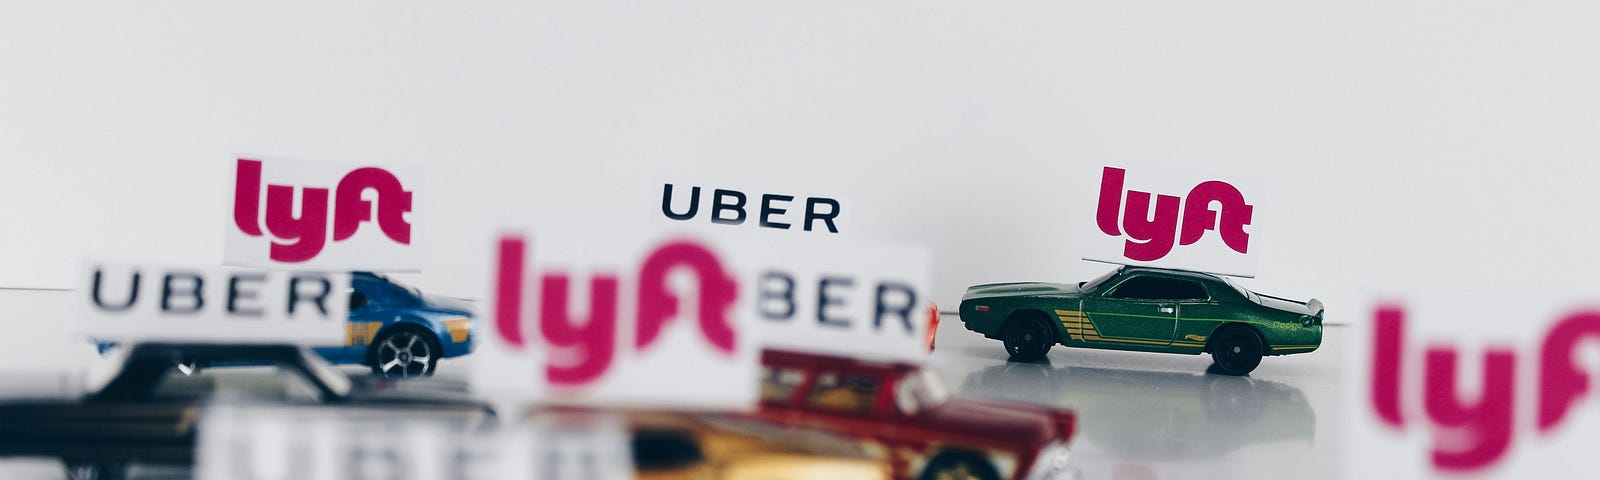 A picture of multiple model cars labeled Uber or lyft